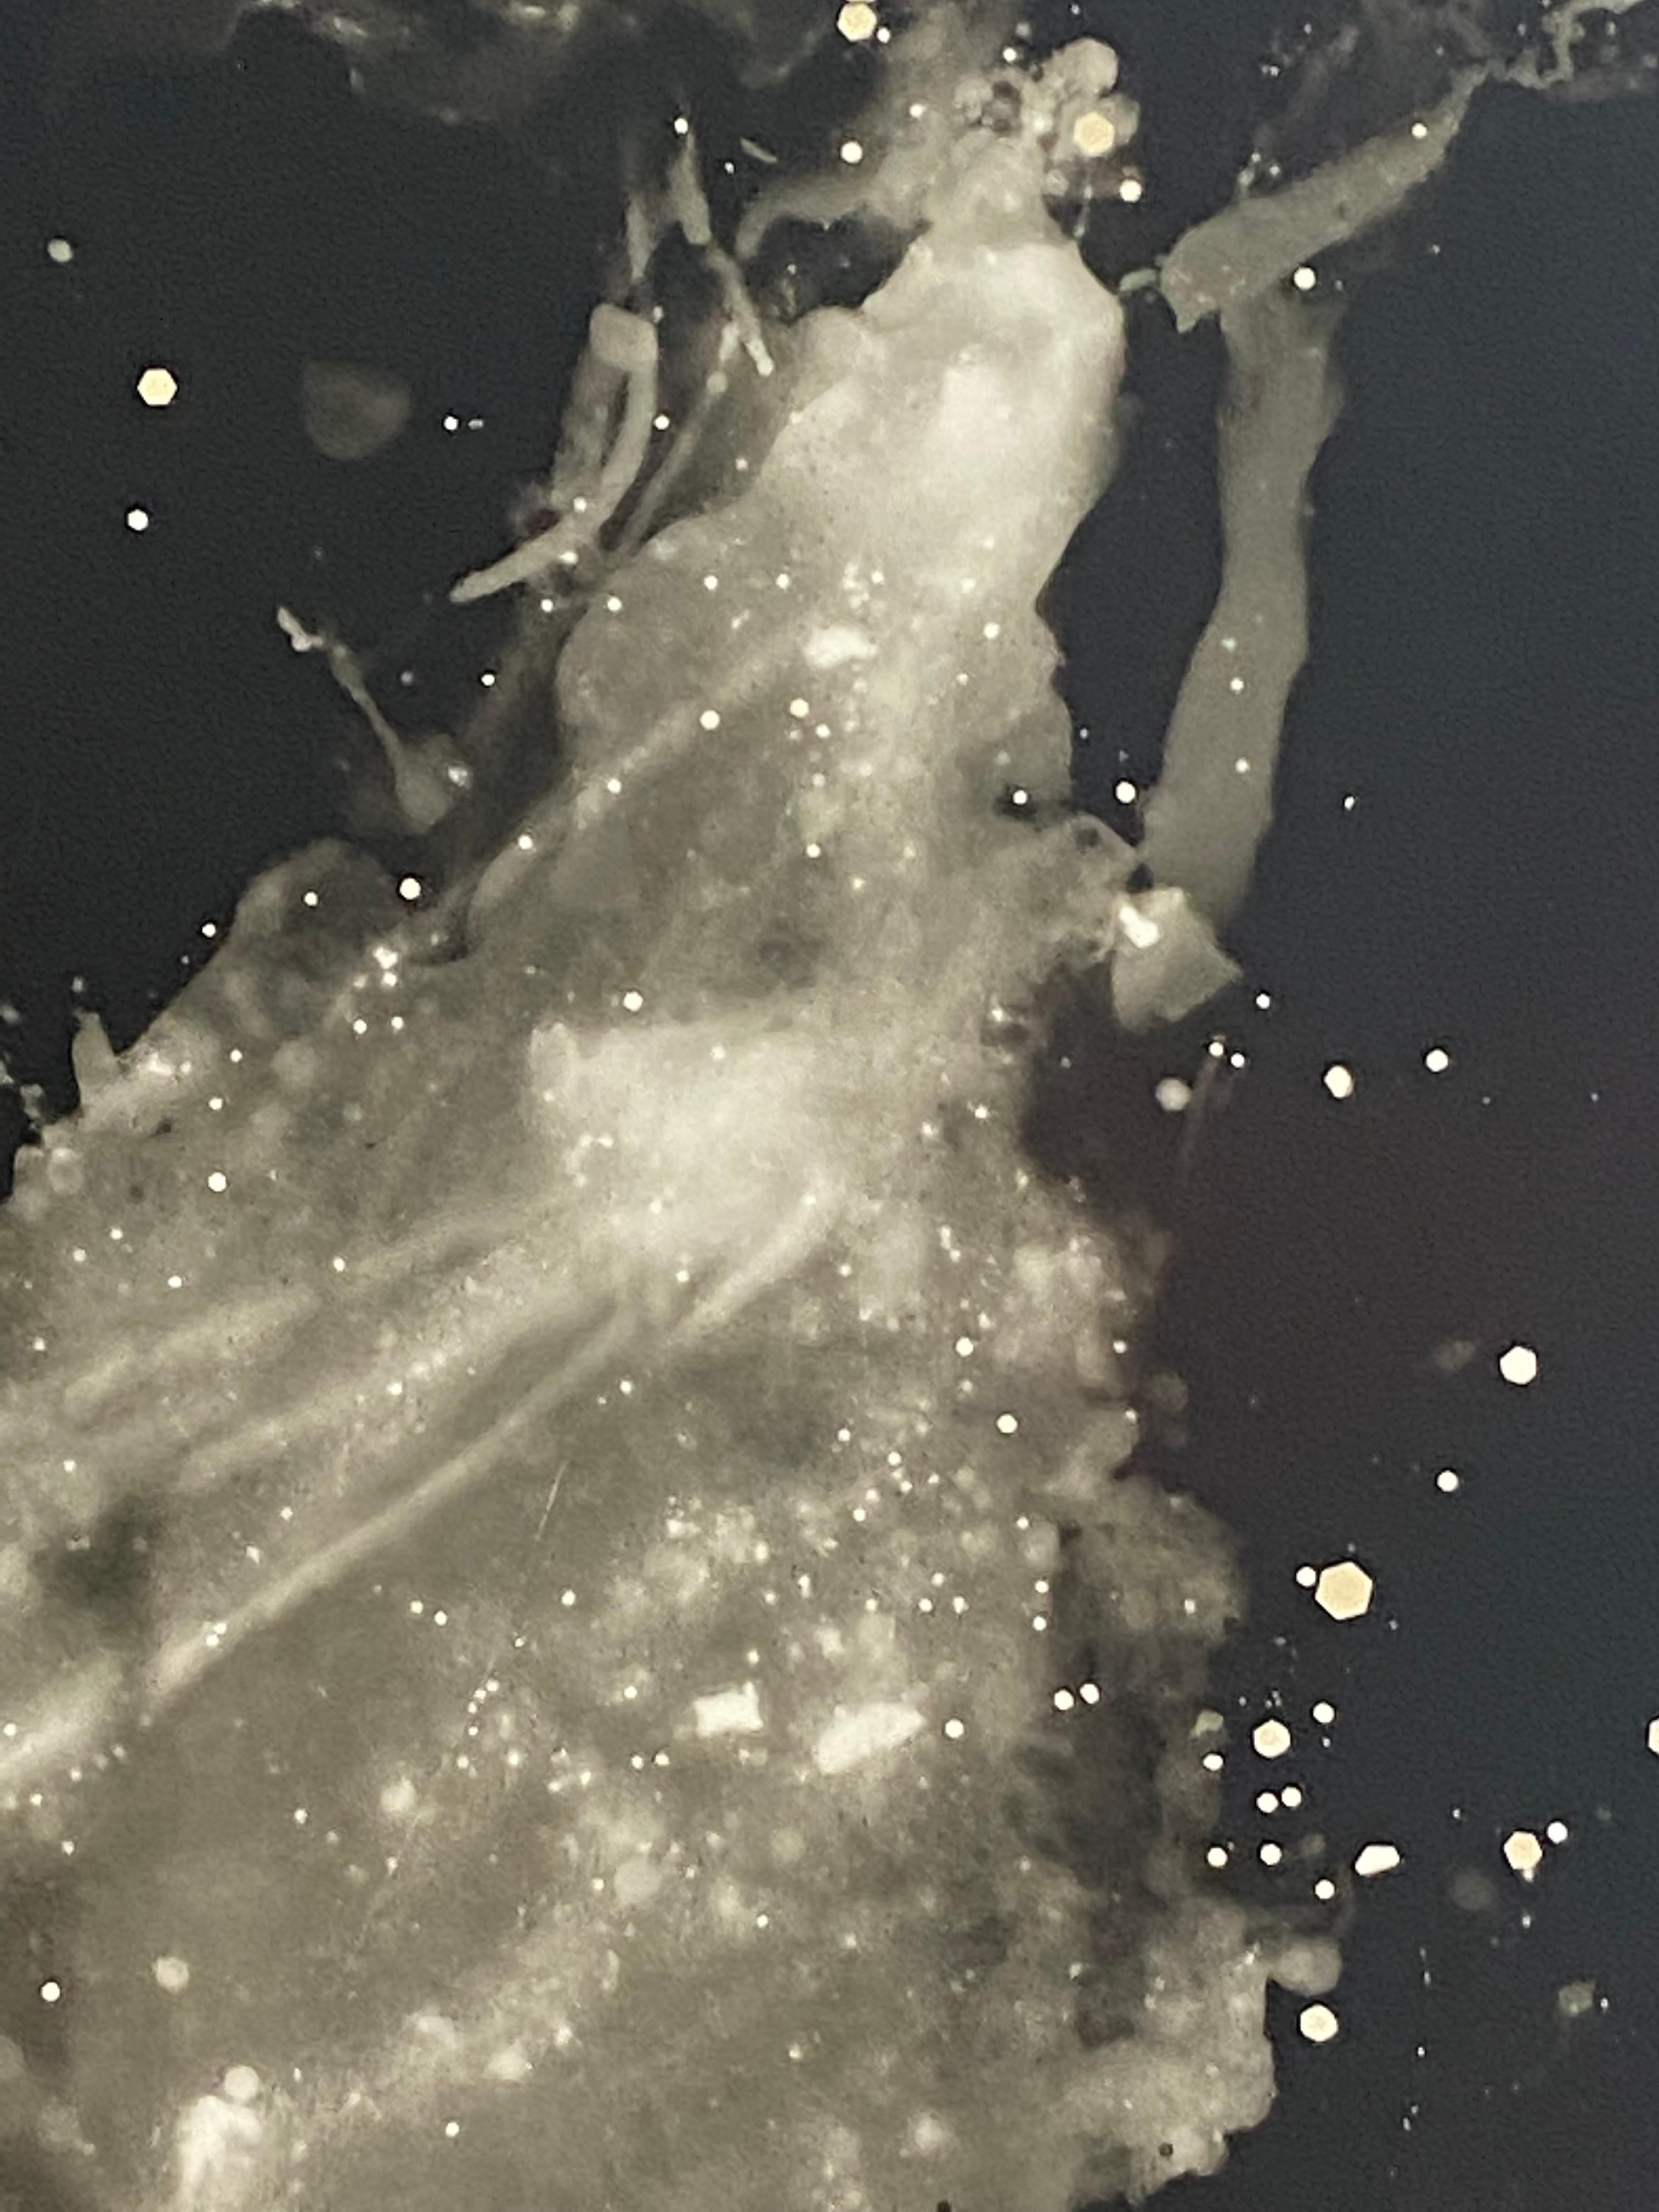 Unique gelatin silver print (photogram); Mixed process multiple exposure with ice, sand, glitter, flowers (and my own hands); Exposed via firework LED (rigged for contrast, filter 3 or 3.5, can’t quite recall).

